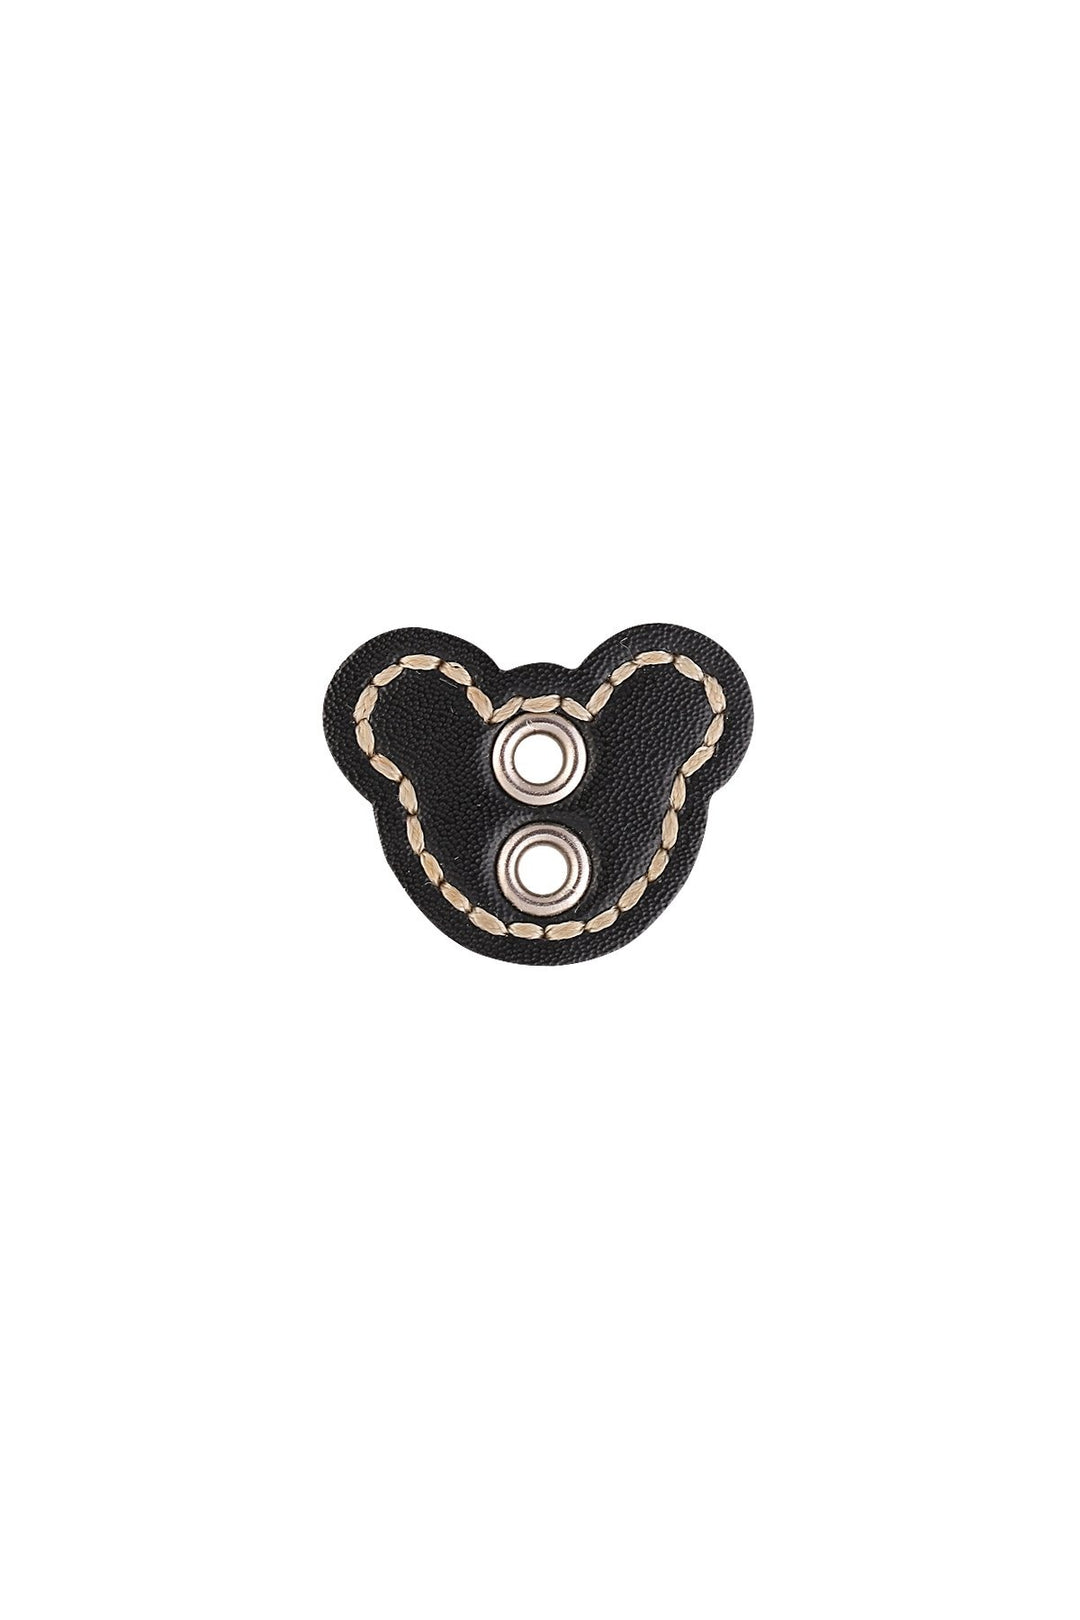 Black 2-Hole Mickey Face Stitched Leather Button